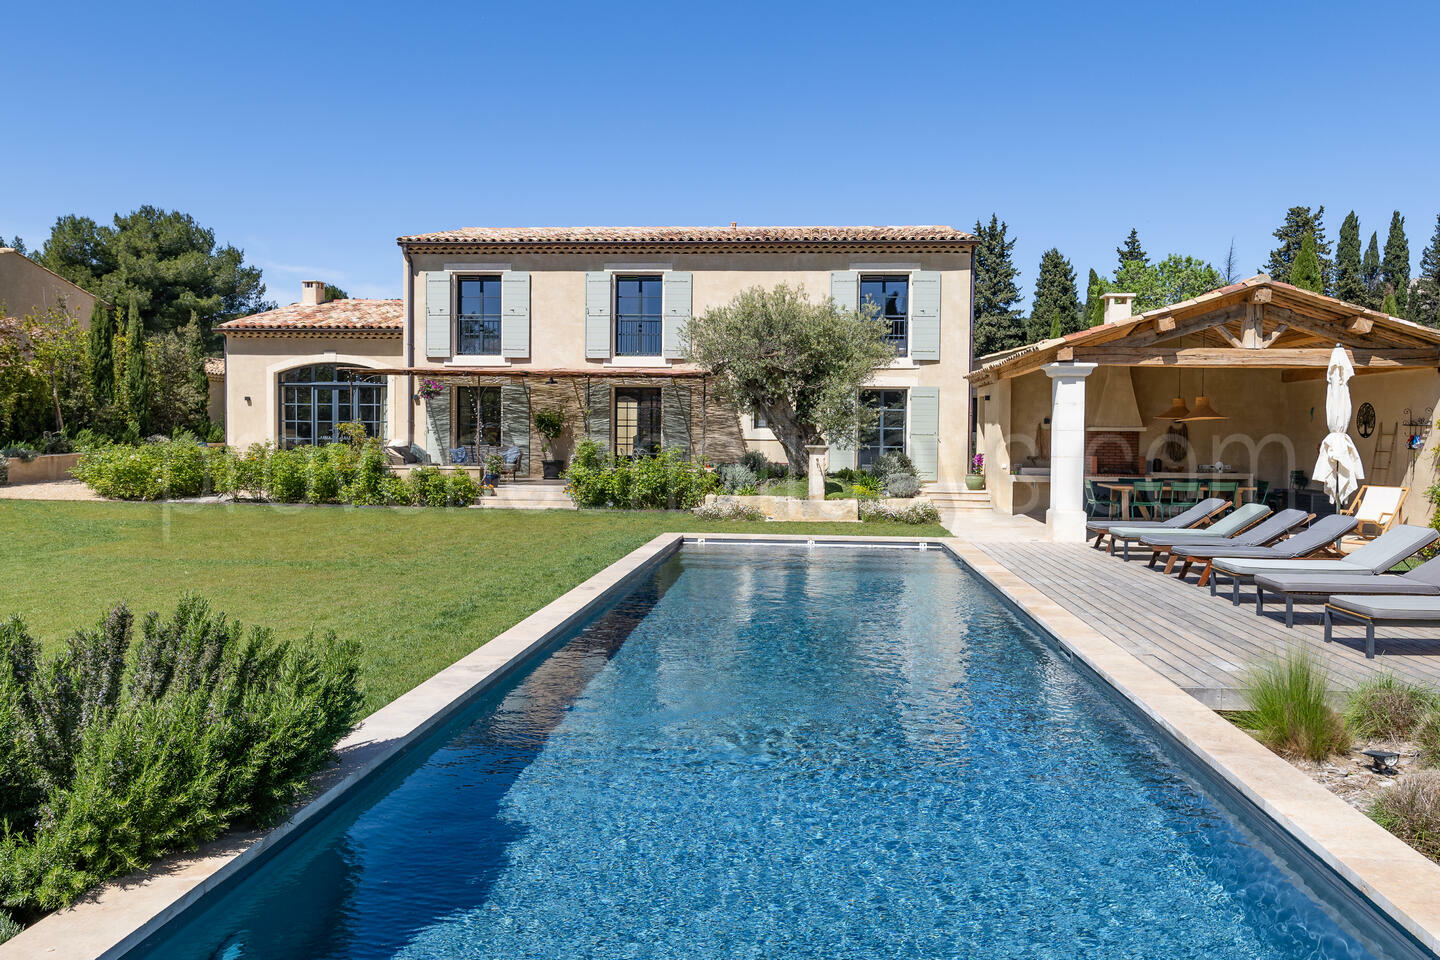 Superb house to rent in Paradou in Provence 1 - Villa Rubis: Villa: Pool